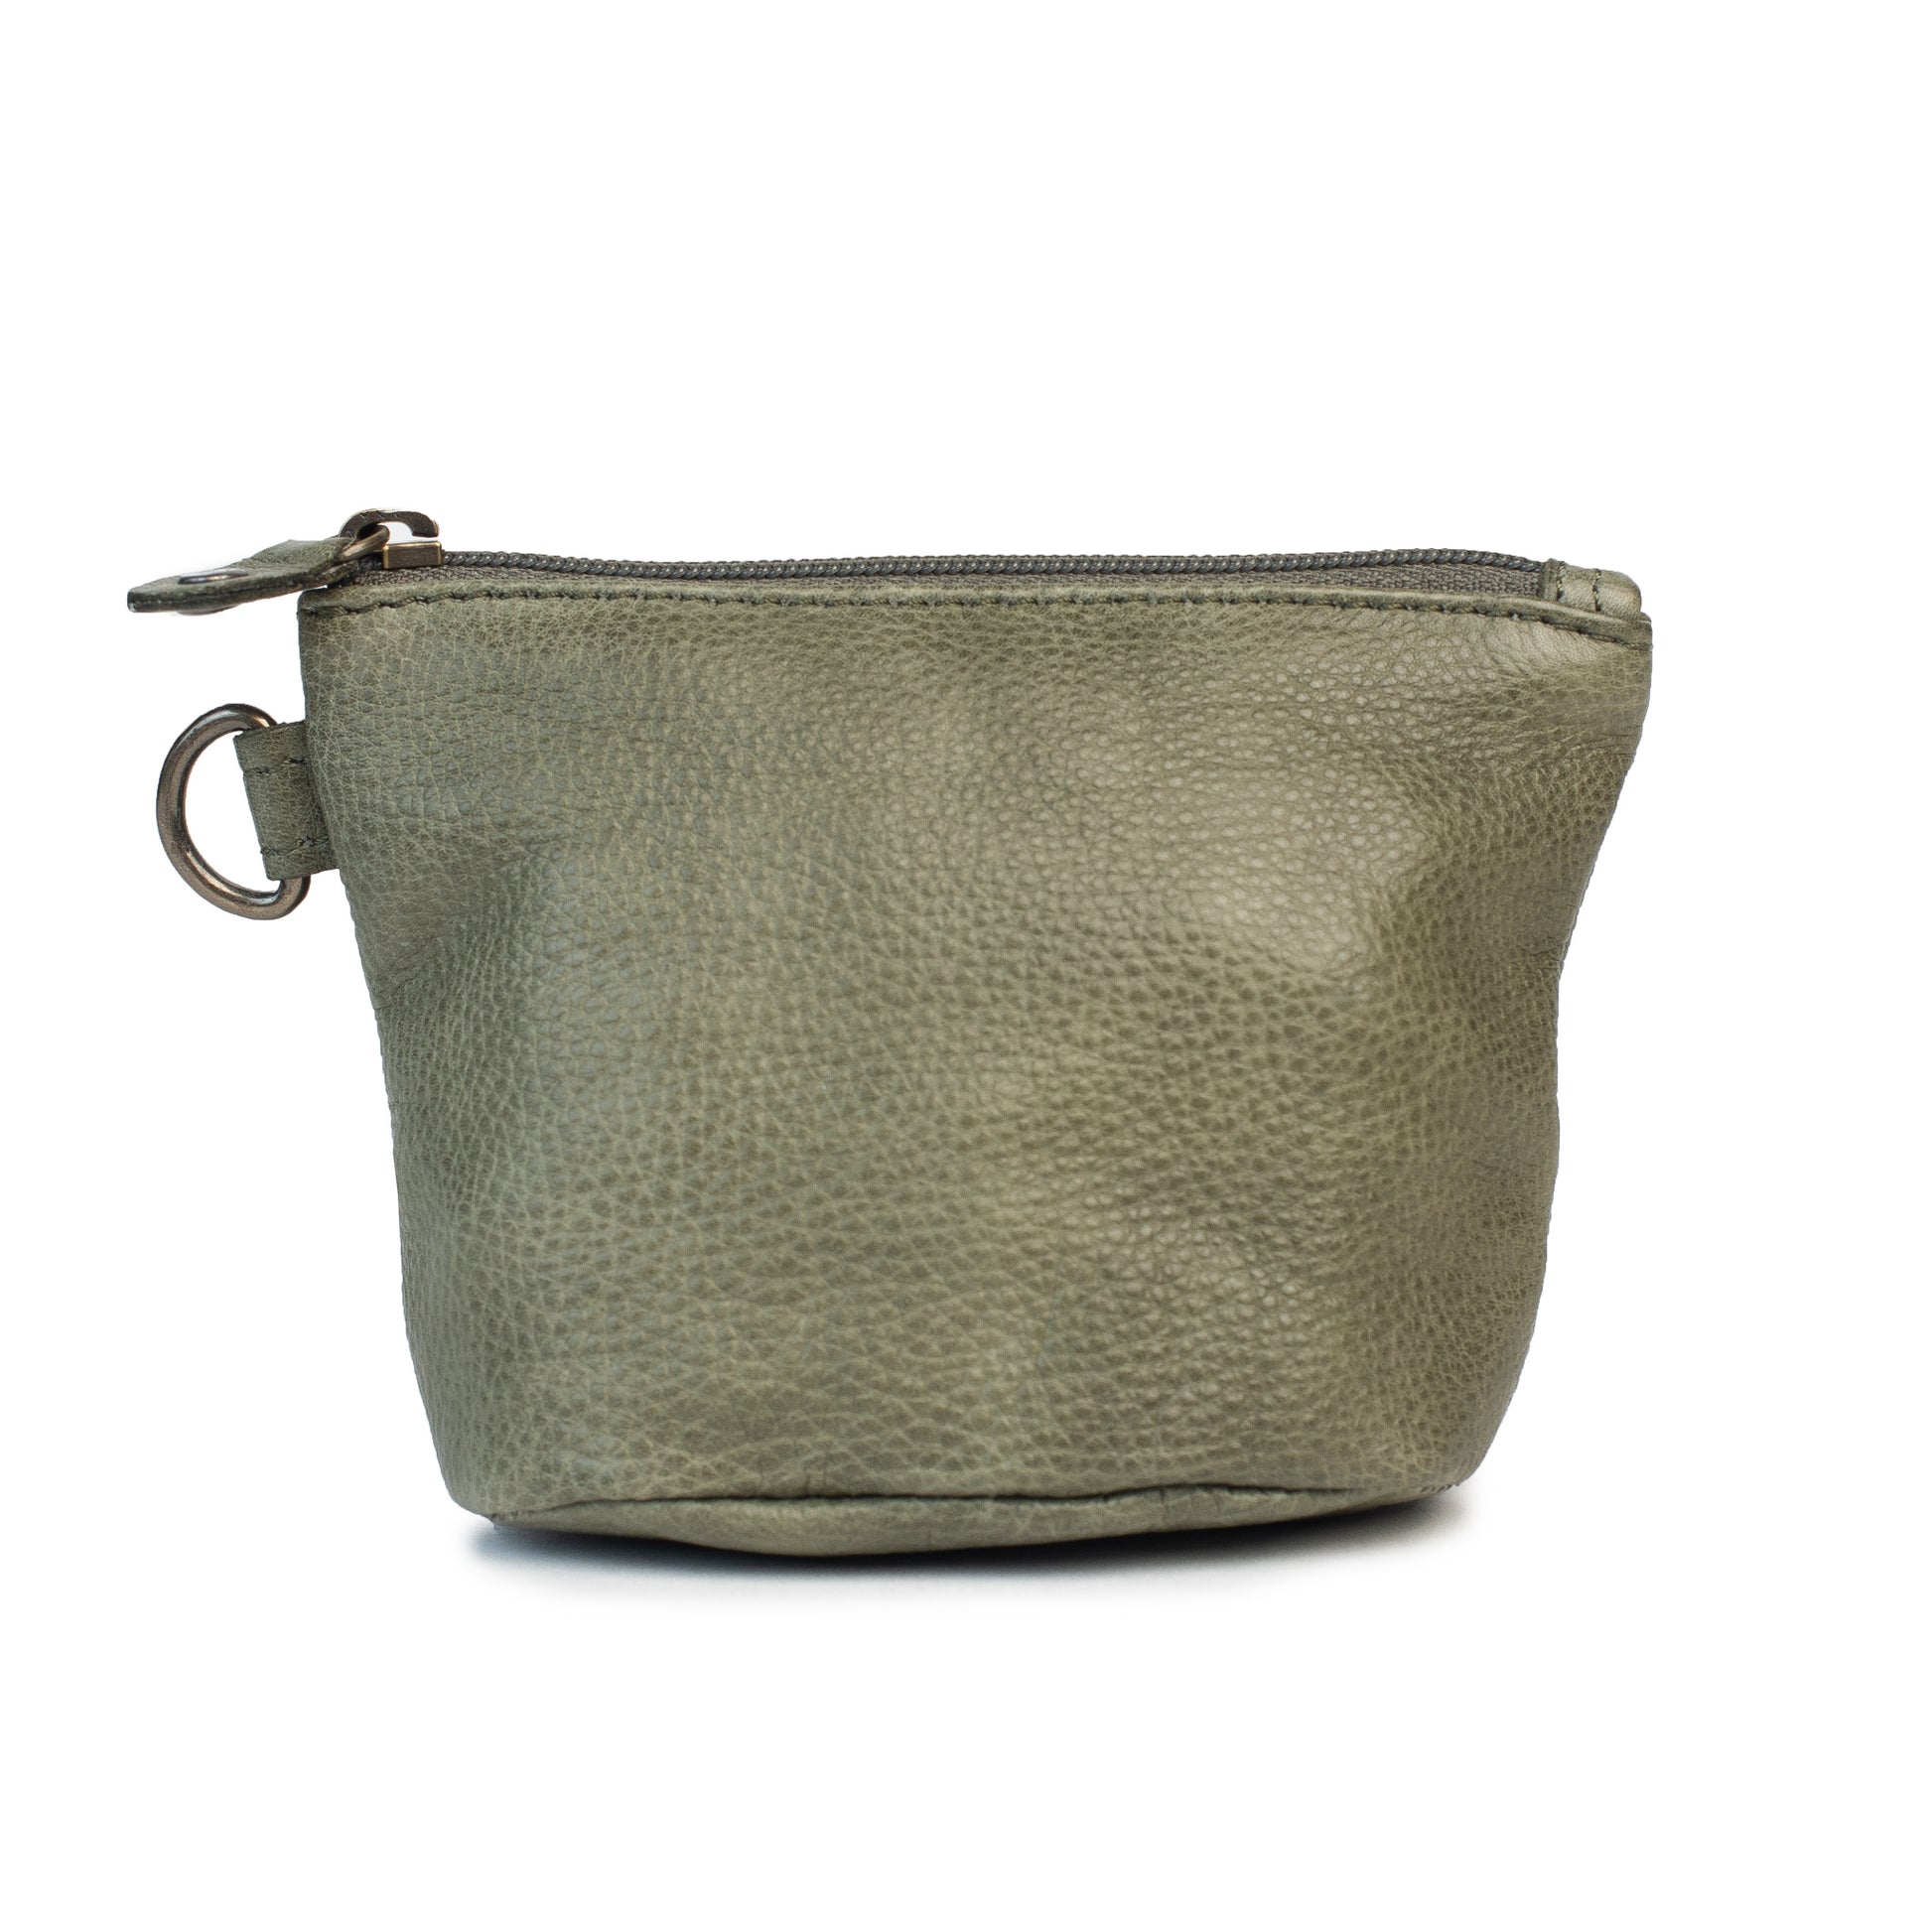 Looking for a coin purse but with more room? Introducing our Rule of Thumb purse, features include:  - zip closure  - roomy interior, fits cards, coins, keys even your lip balm  - side tab with D ring to attach wrist strap or to attach to your bag or keys  - wrist strap included  12 x 8 x 5 cm